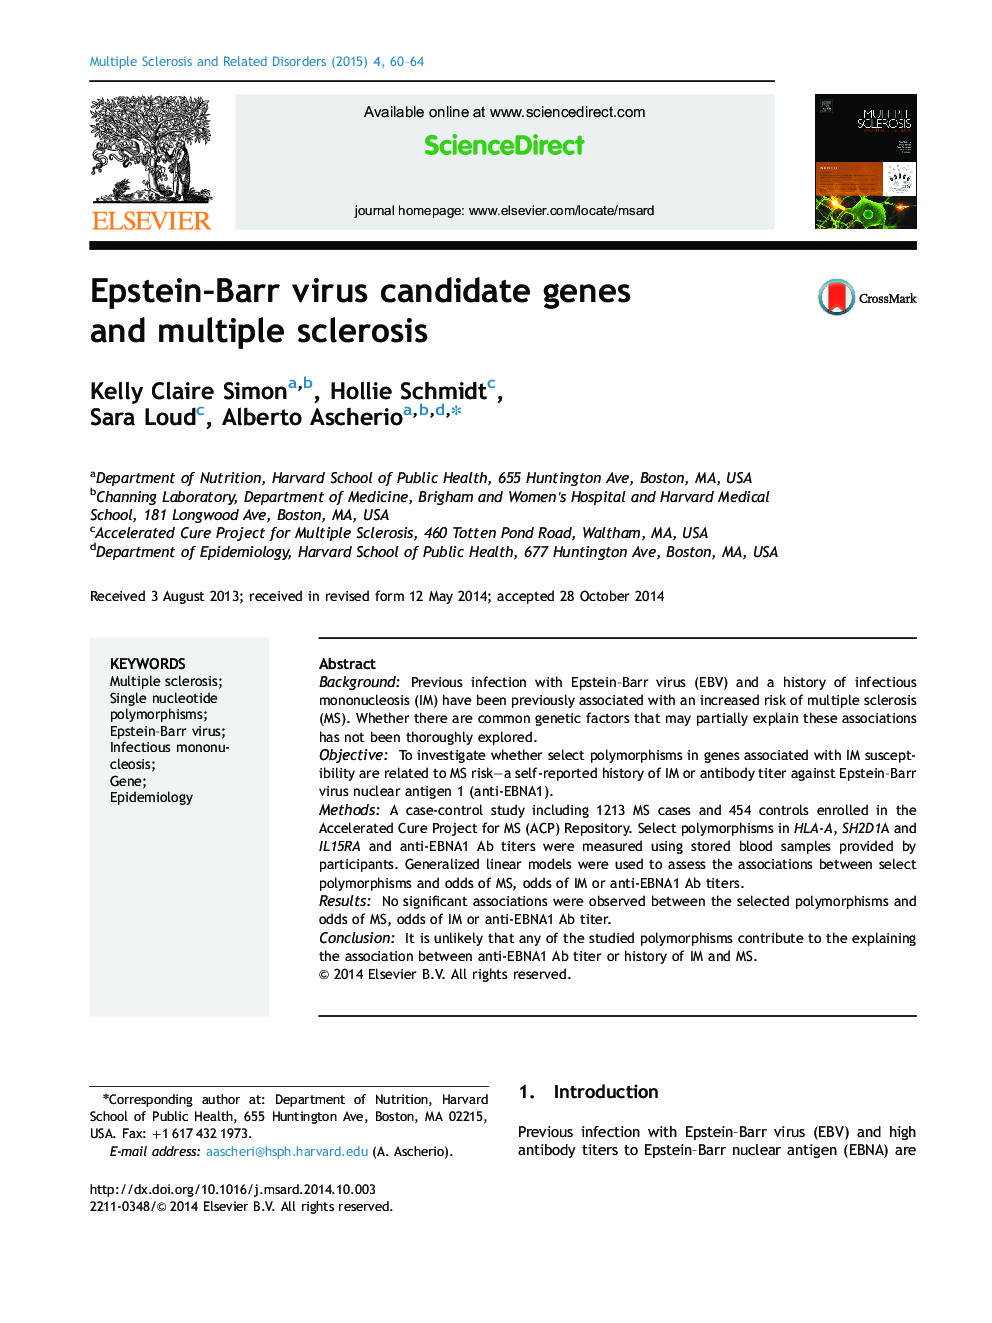 Epstein–Barr virus candidate genes and multiple sclerosis